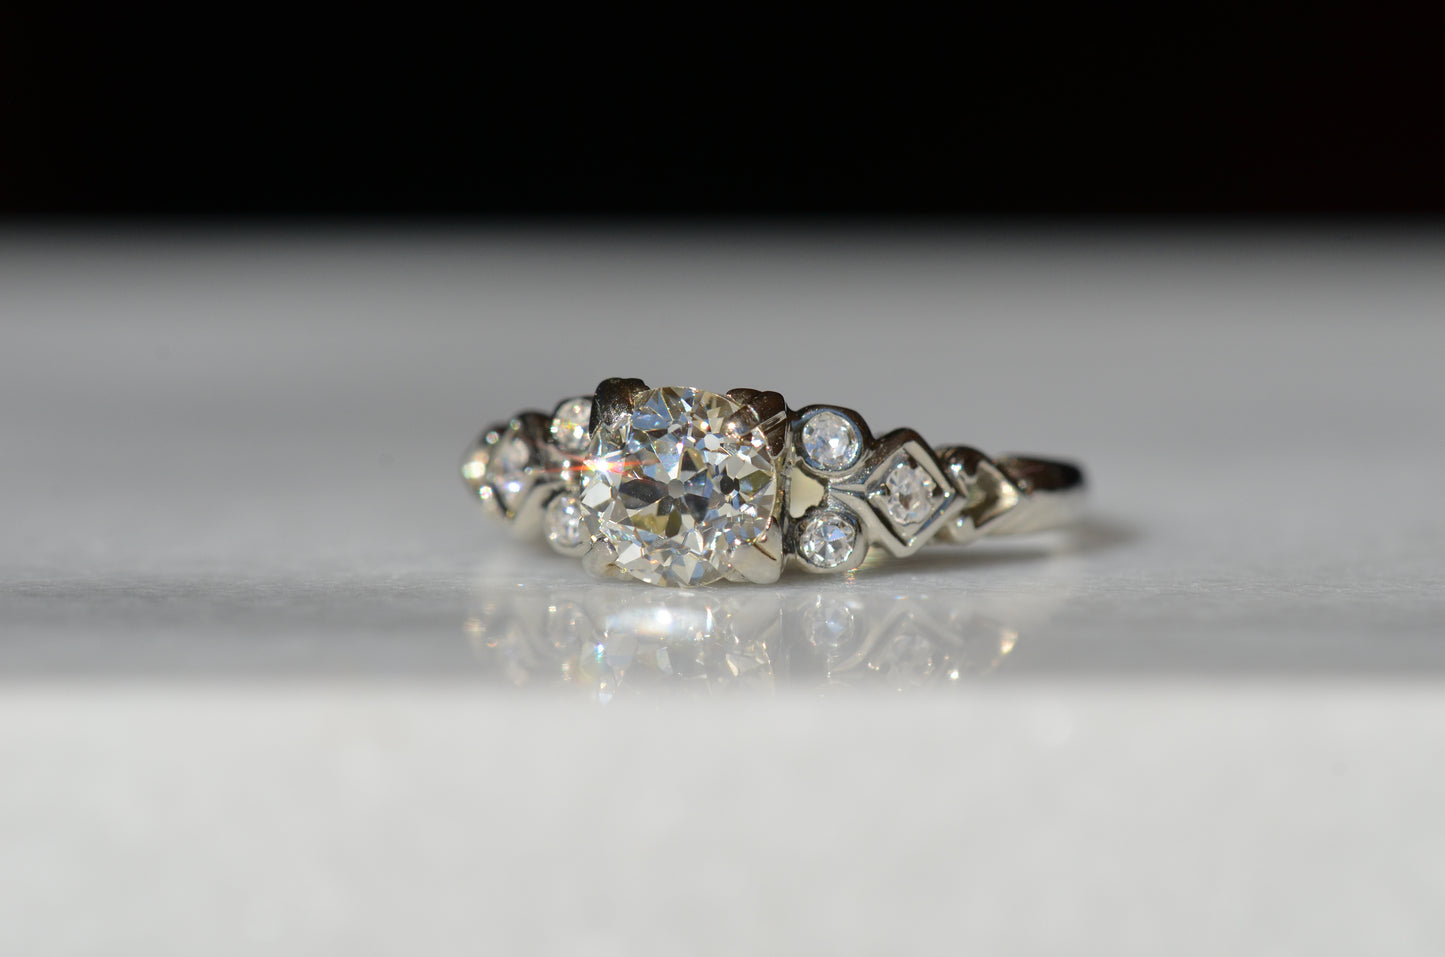 ring in direct sunlight, angled slightly askew. a flash of orangey-red light radiates off the central diamond, and one shoulder is also in focus.